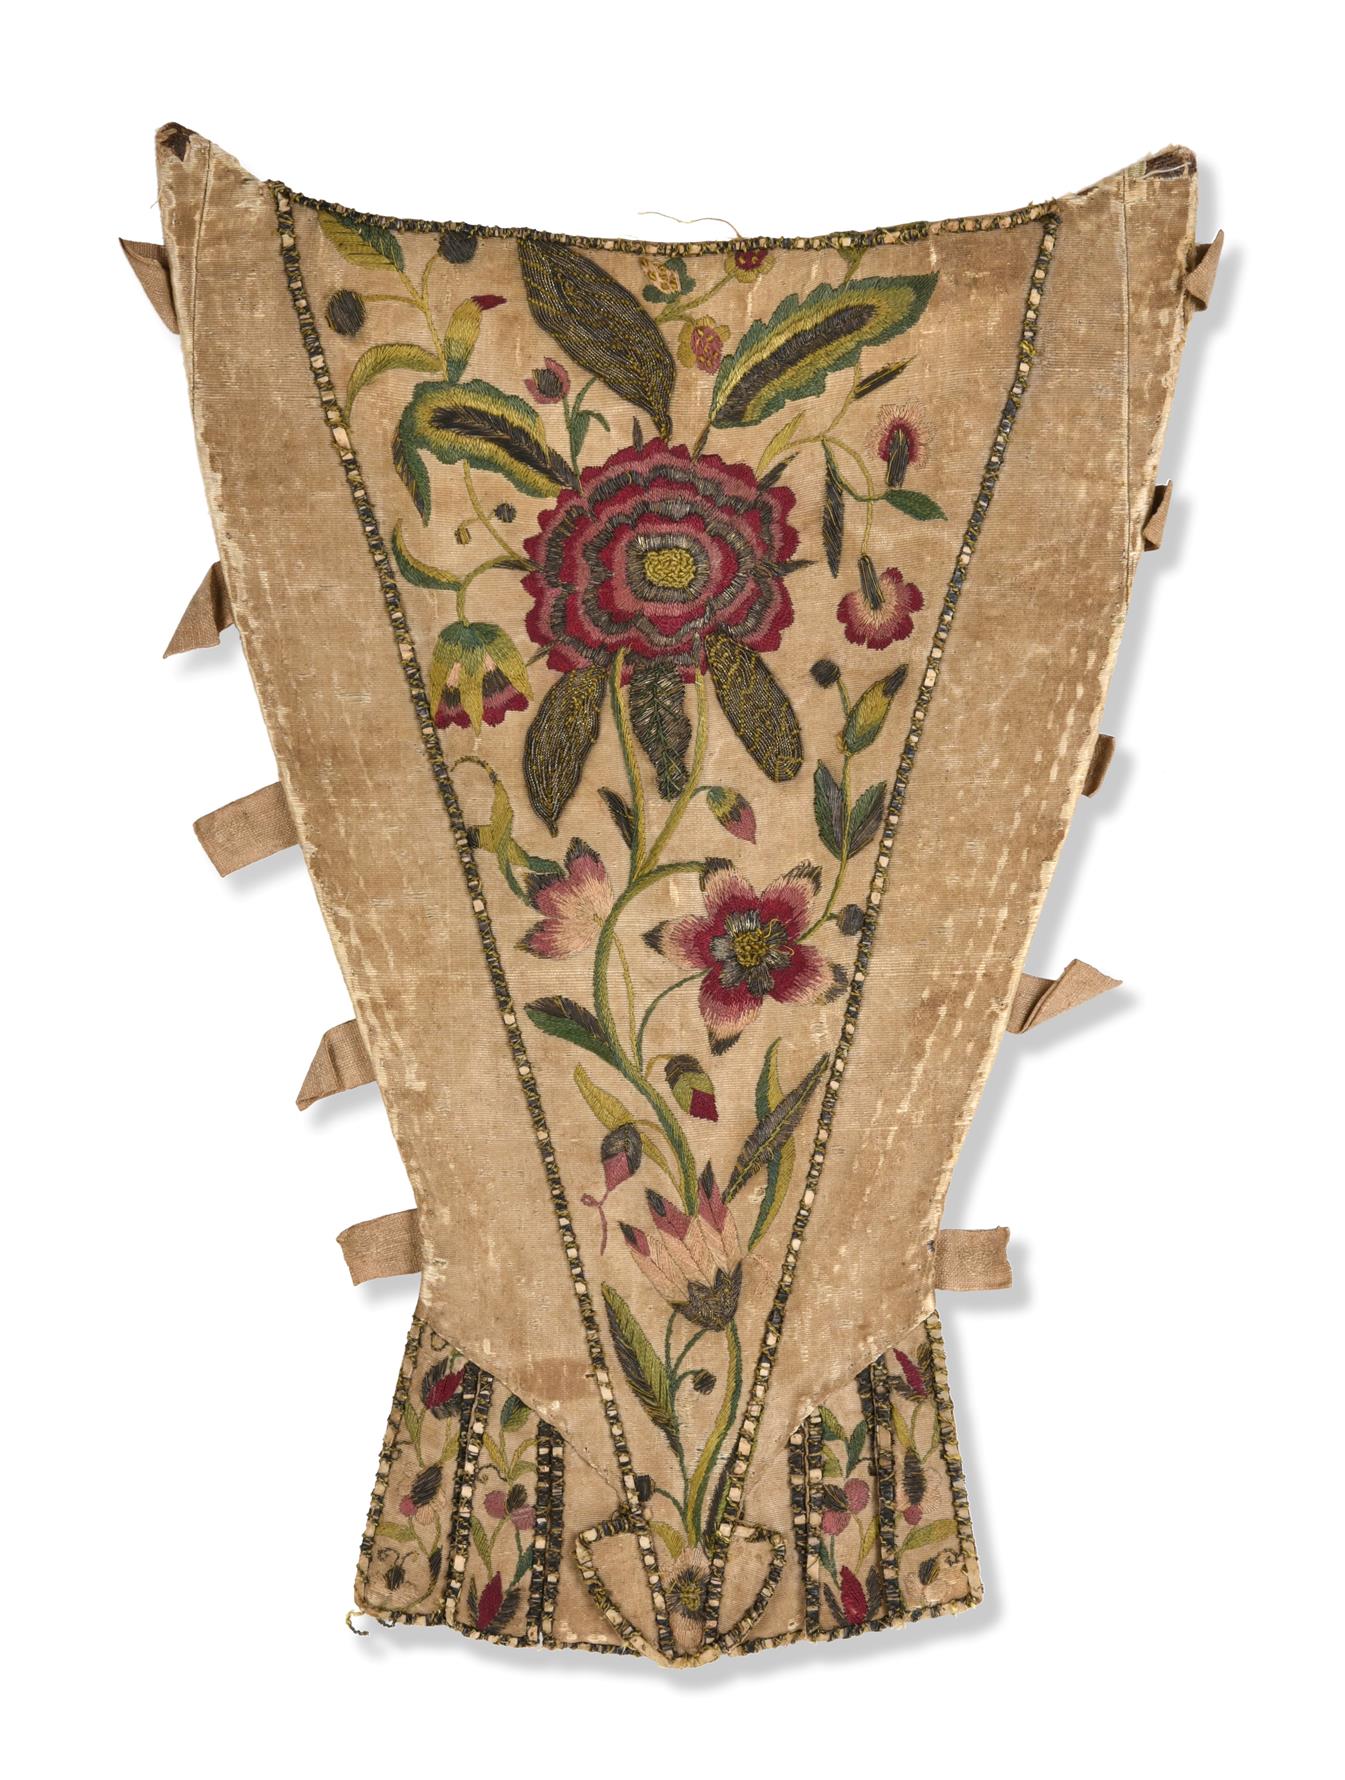 Circa 1720 English Stomacher worked on cream silk, decorated with coloured silk embroidered flower